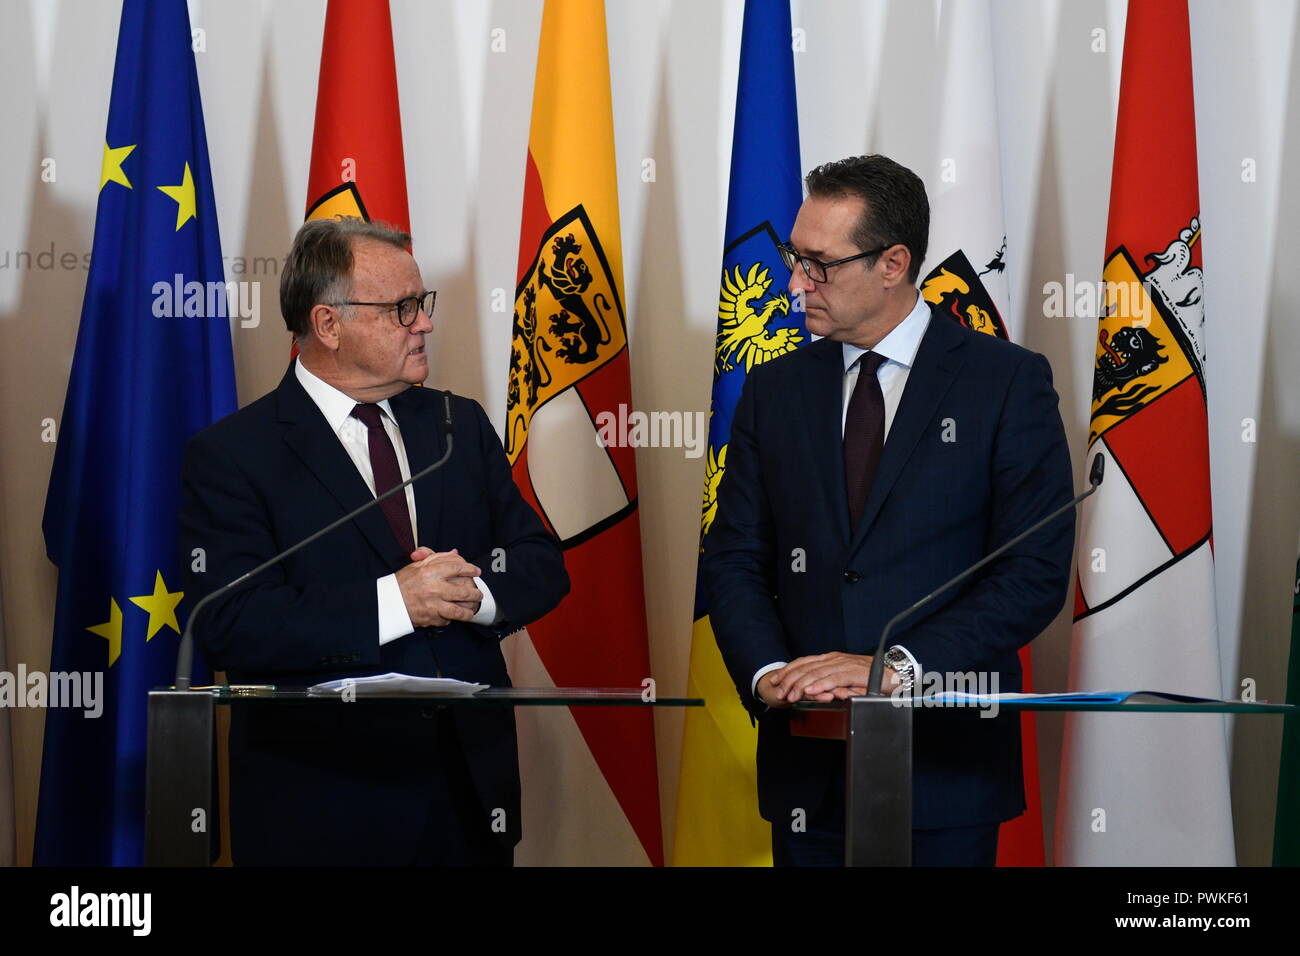 Vienna, Austria. 17 October 2018. Comment on the lack of competence between the federal government and the federal states in the press foyer of the 31st Council of Ministers at Wednesday. Picture shows (from L to R) Hans Niessl (SPÖ) and Heinz Christian Strache (FPÖ). Credit: Franz Perc/Alamy Live News Stock Photo